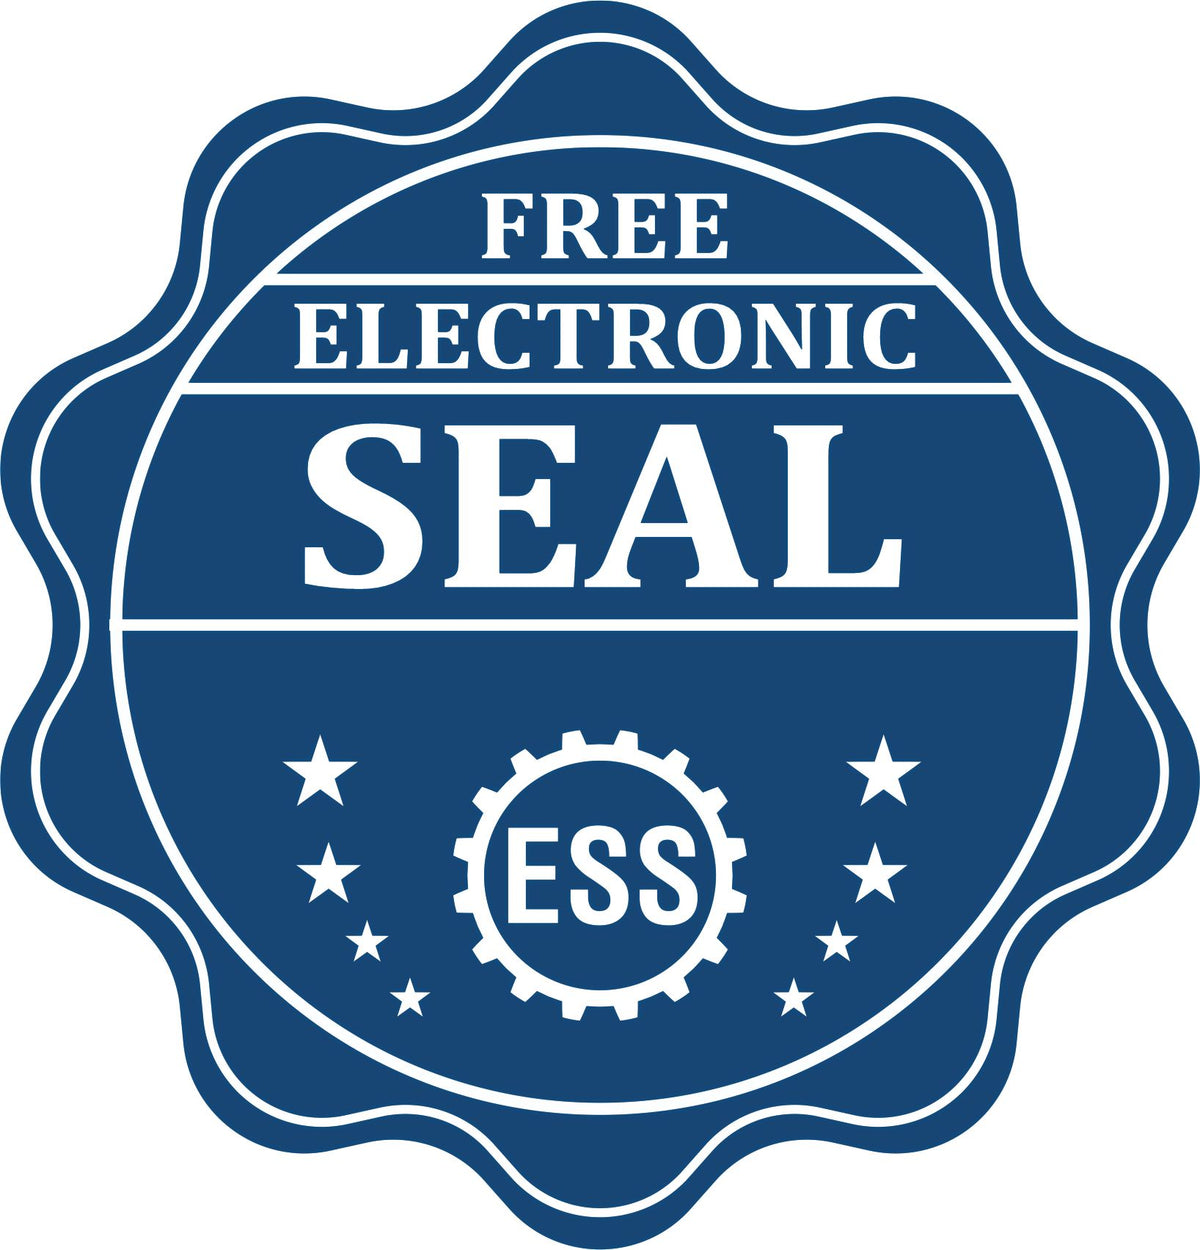 A badge showing a free electronic seal for the Wooden Handle Maryland Rectangular Notary Public Stamp with stars and the ESS gear on the emblem.